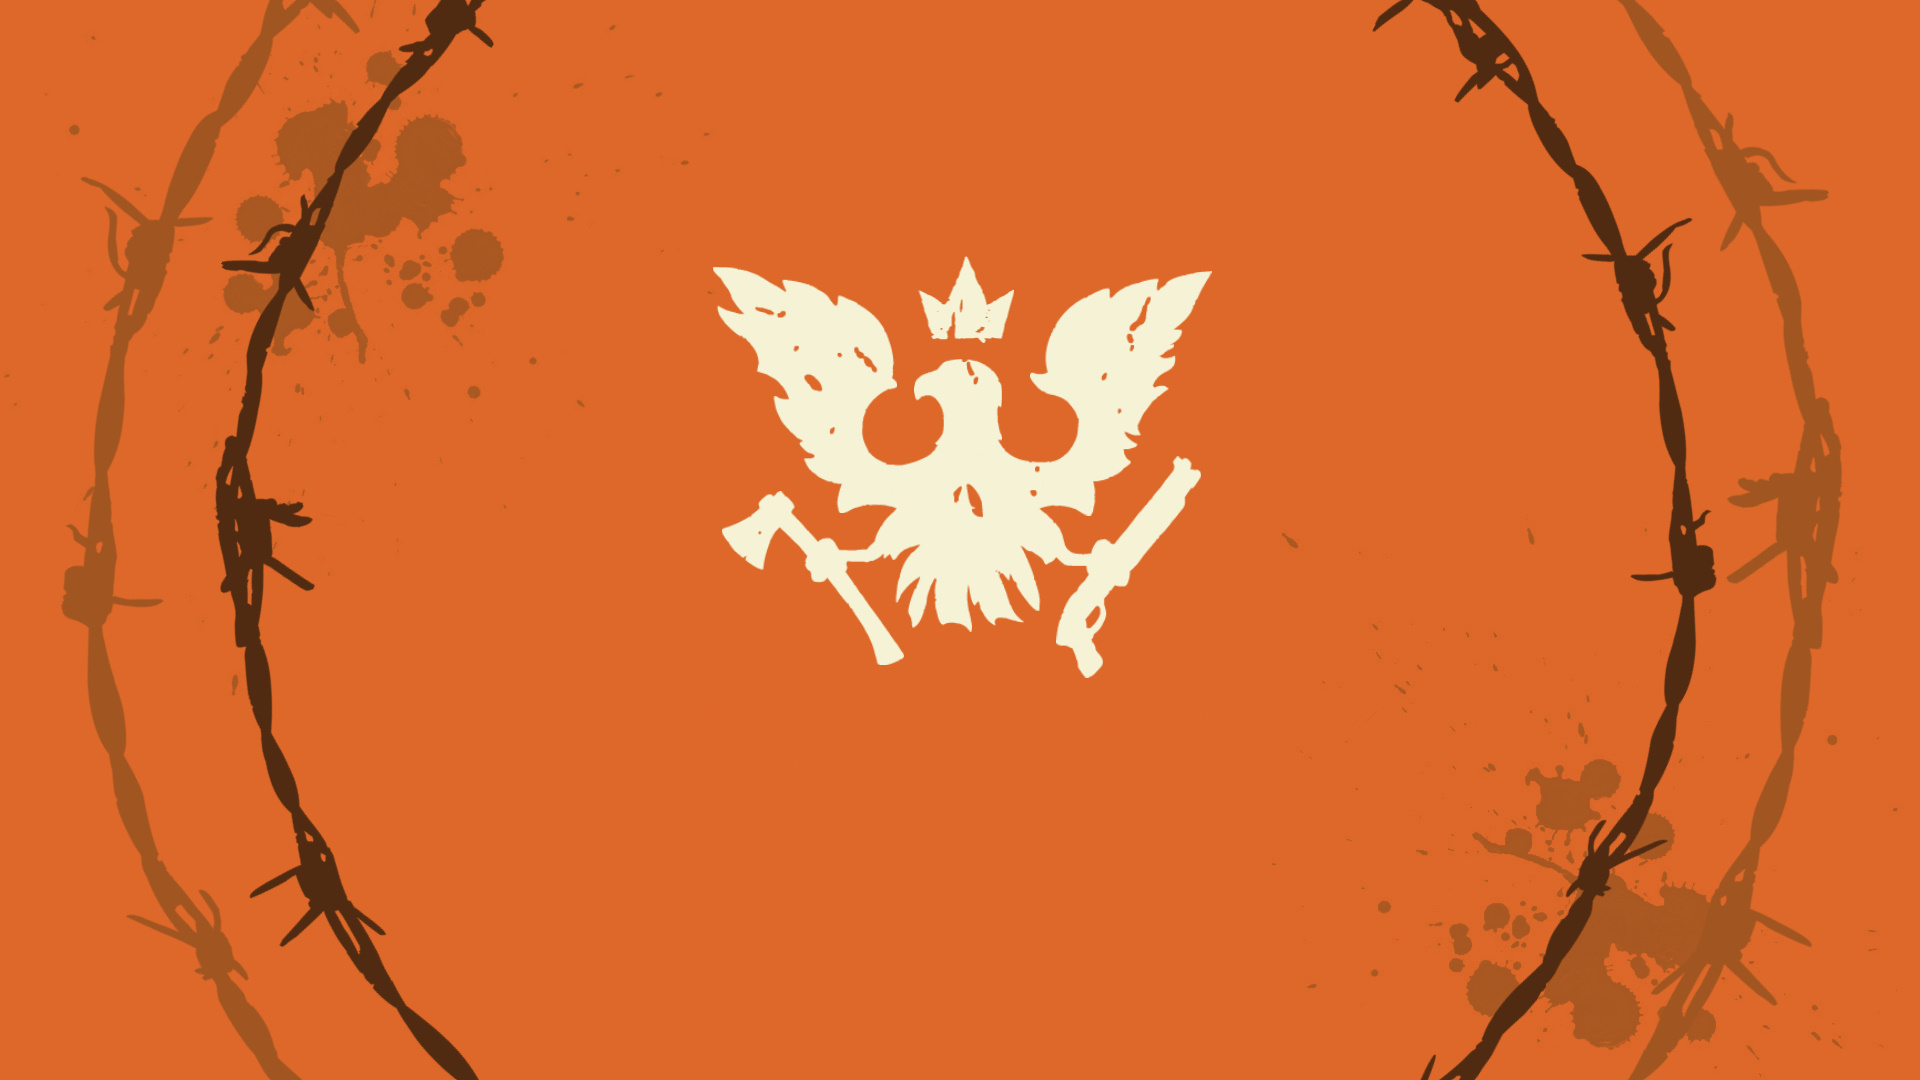 General 1920x1080 State of Decay 2 video games minimalism simple background logo orange background